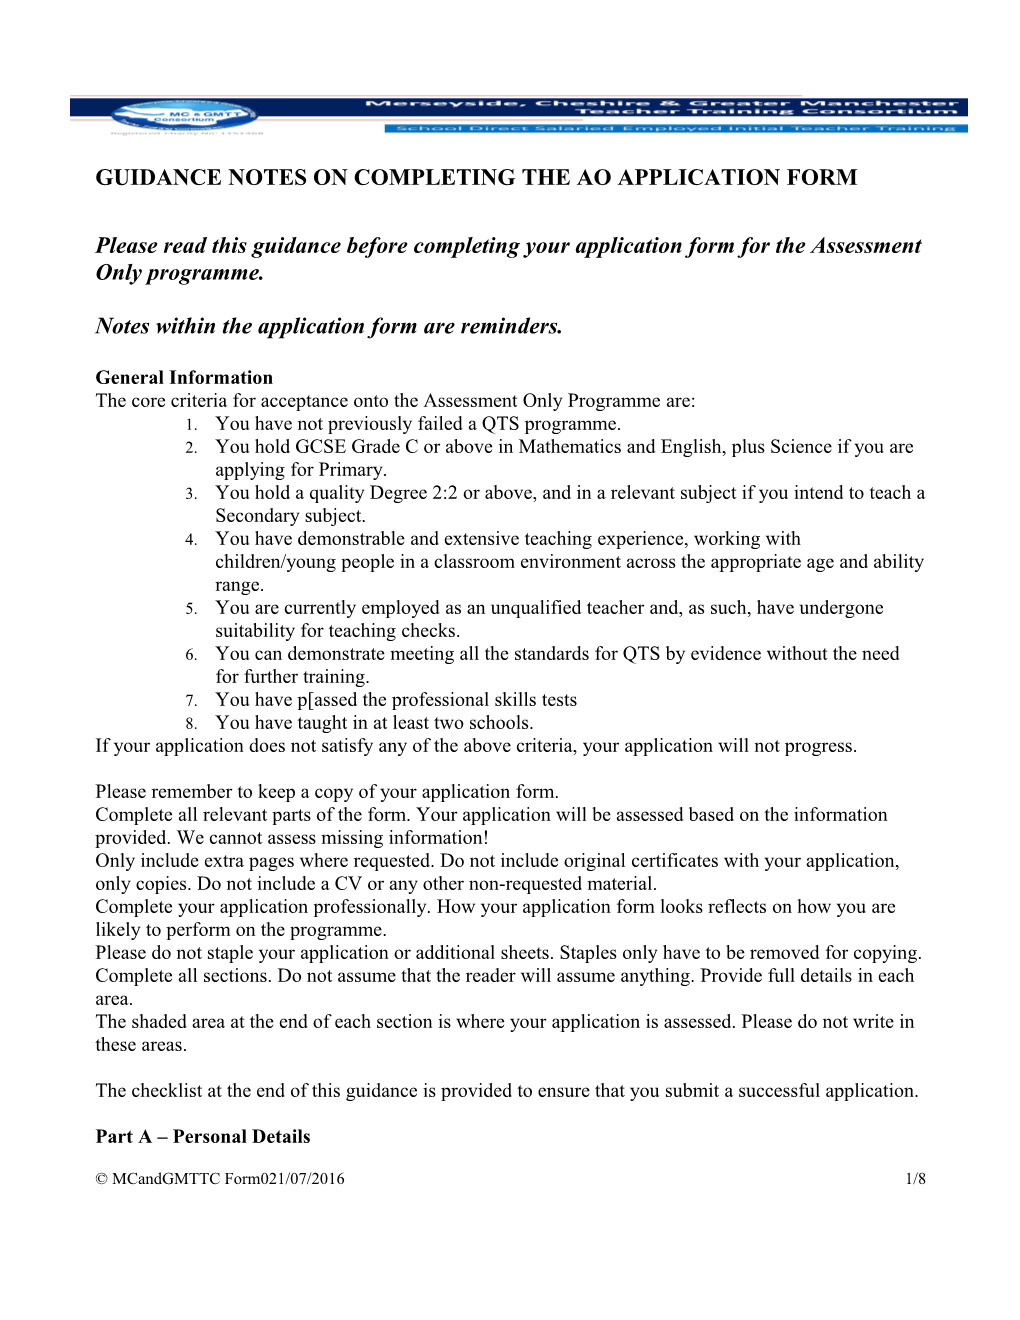 Guidance Notes on Completing the Ao Application Form